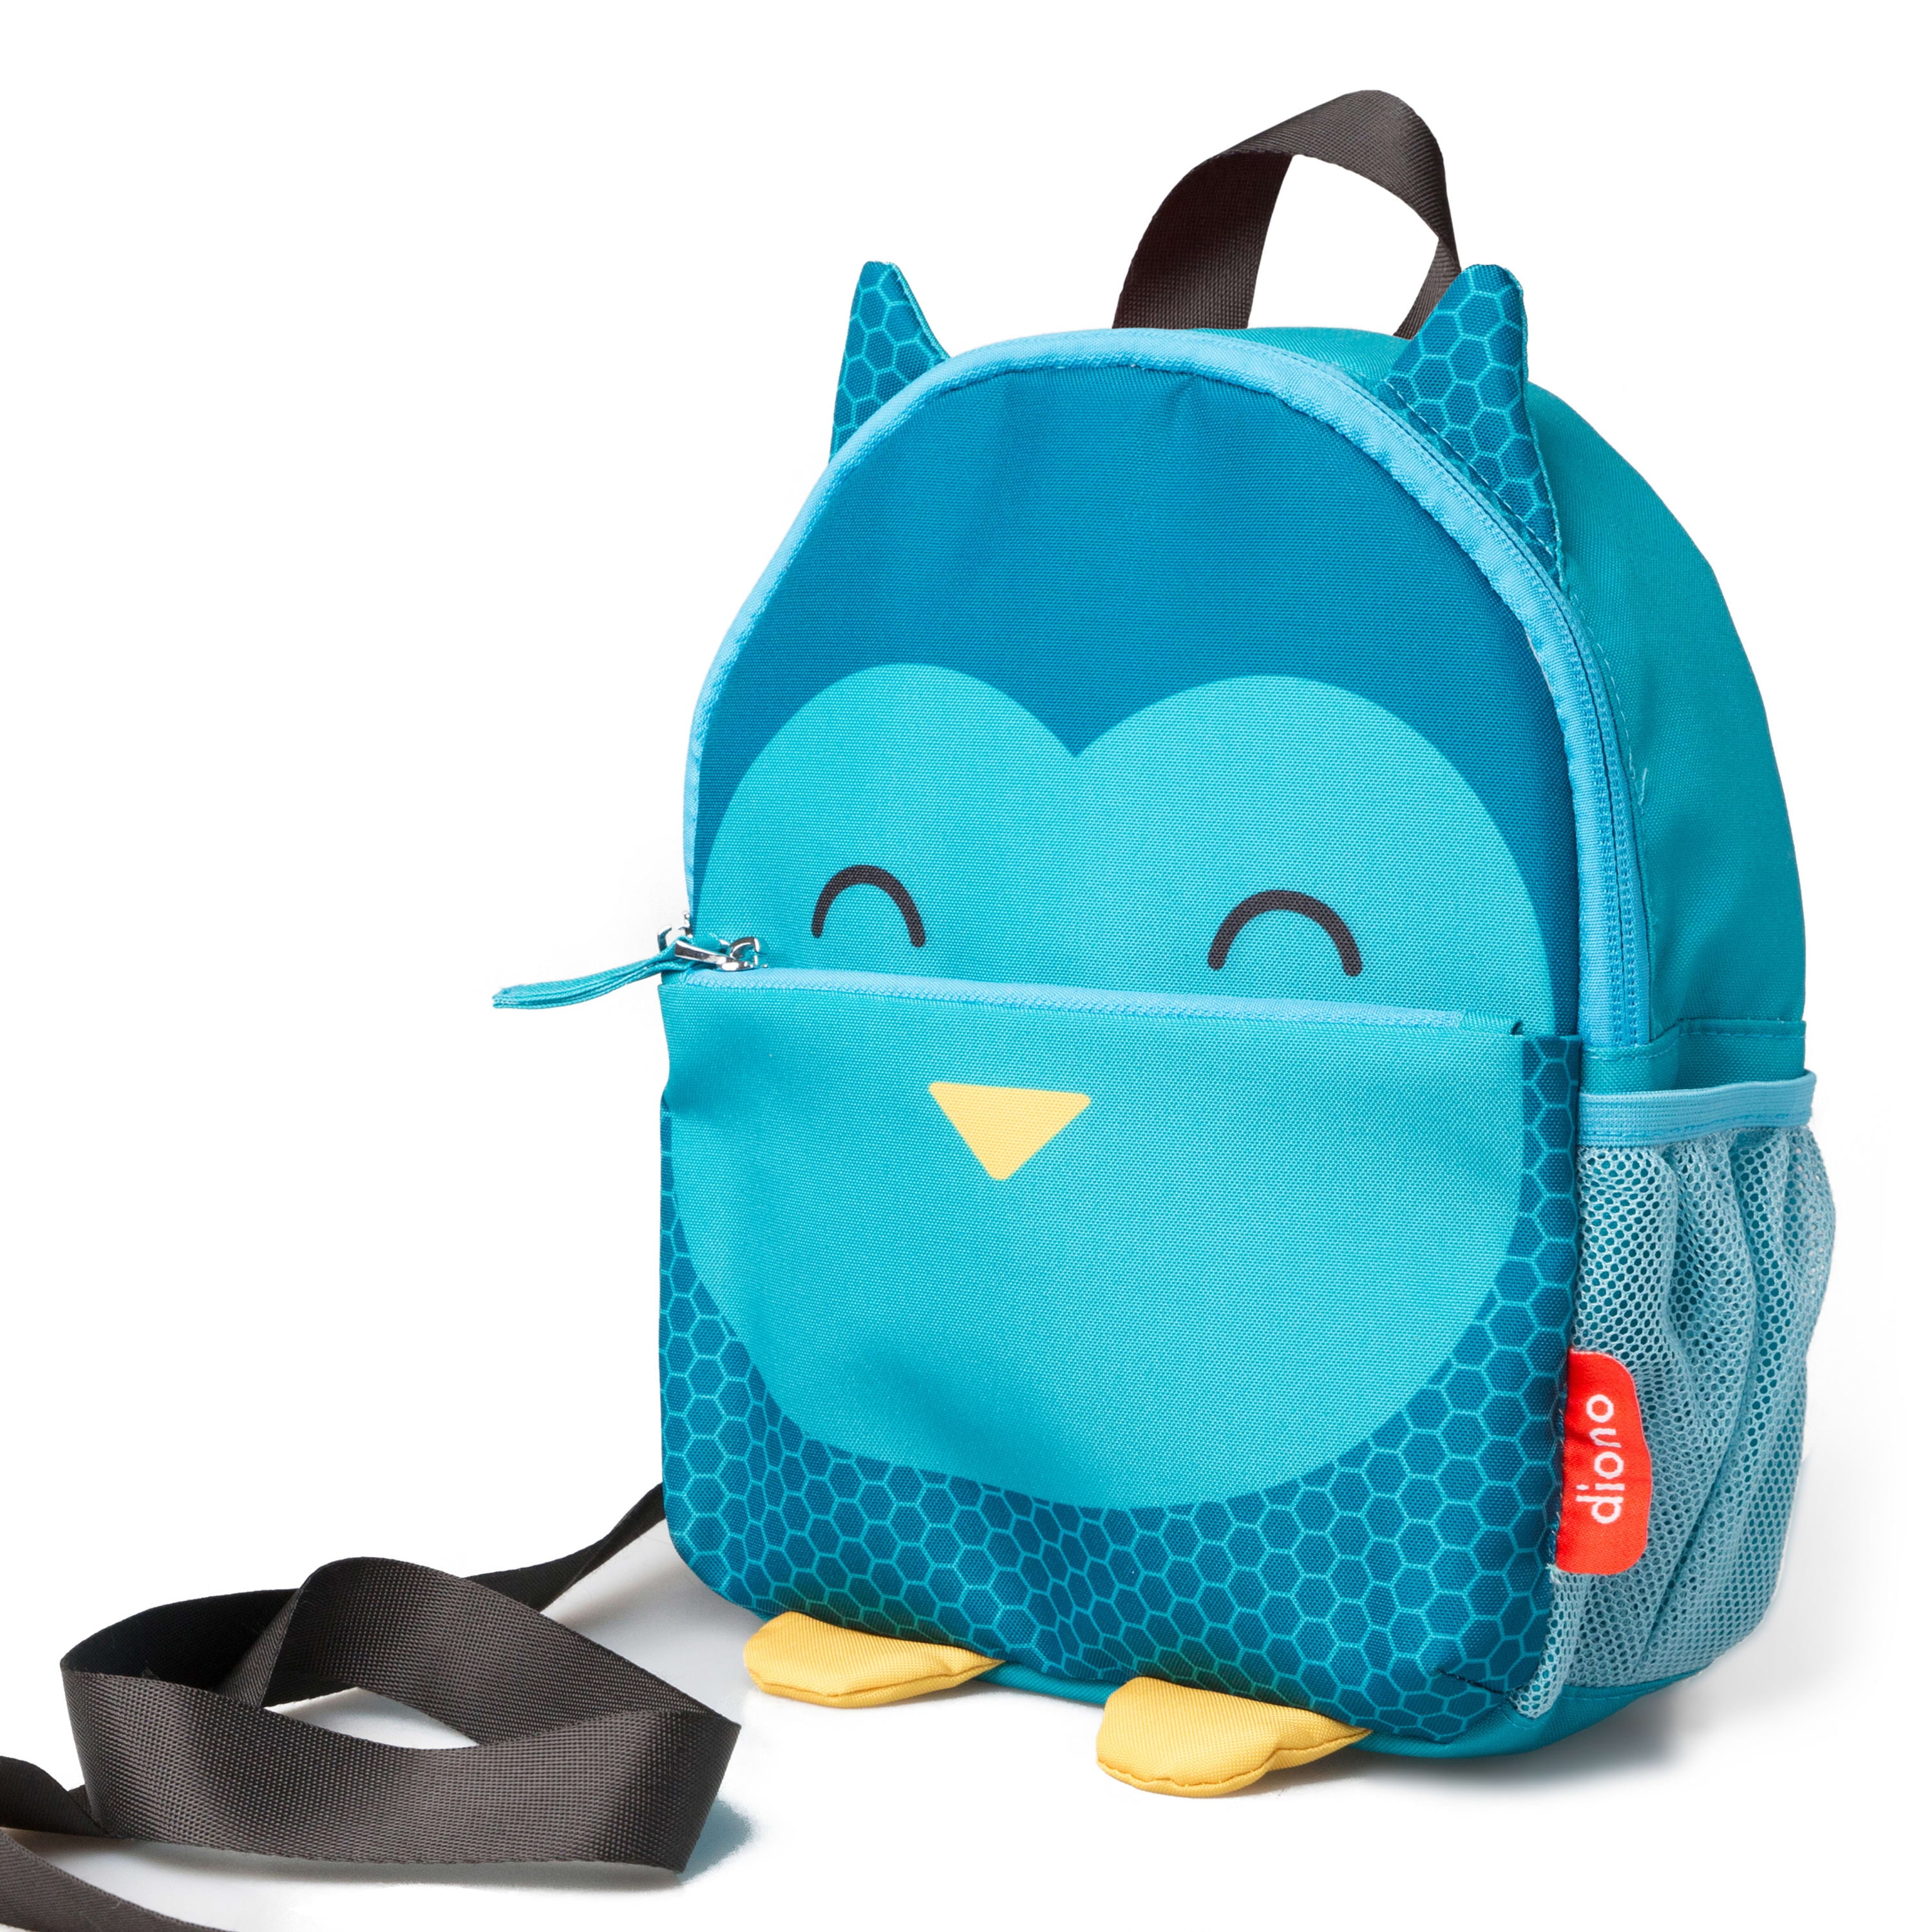 Kids Owl Cartoon Anti-Lost Safety Harness Toddler Children School Bags Backpack 